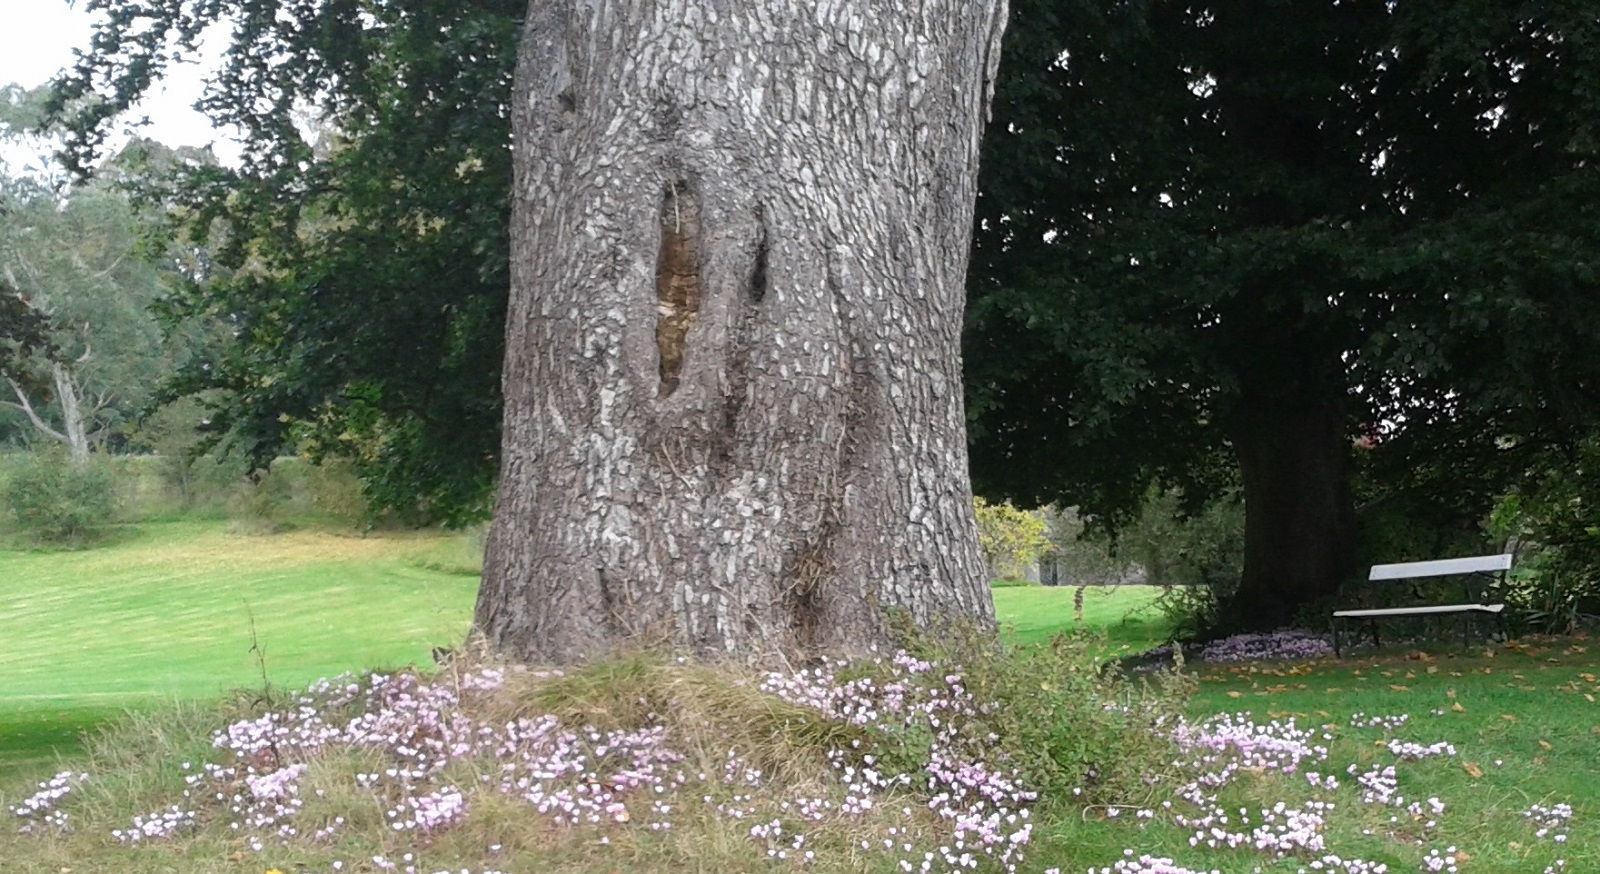 The thick trunk of a tree on a grassy knoll with daisies, in a rural setting.